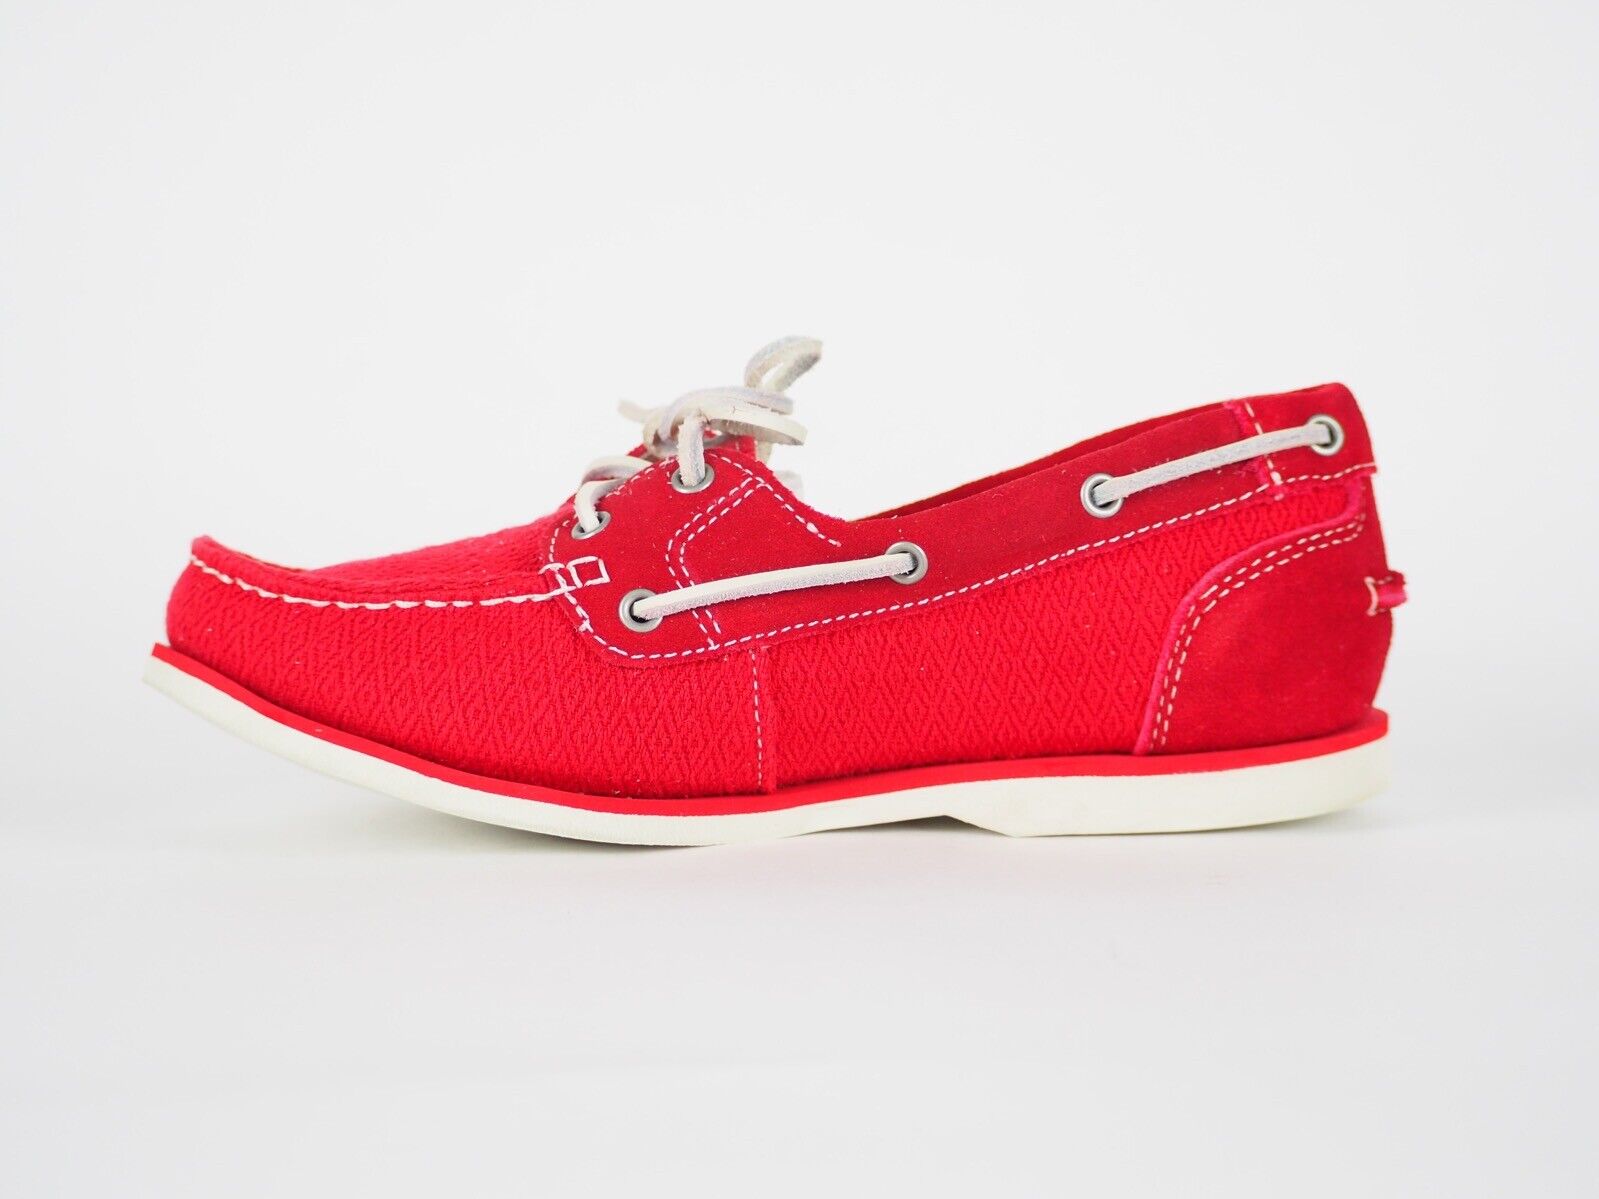 Womens Timberland Classic 2 Eye A14LV Red Fabric Textured Boat Shoes - London Top Style